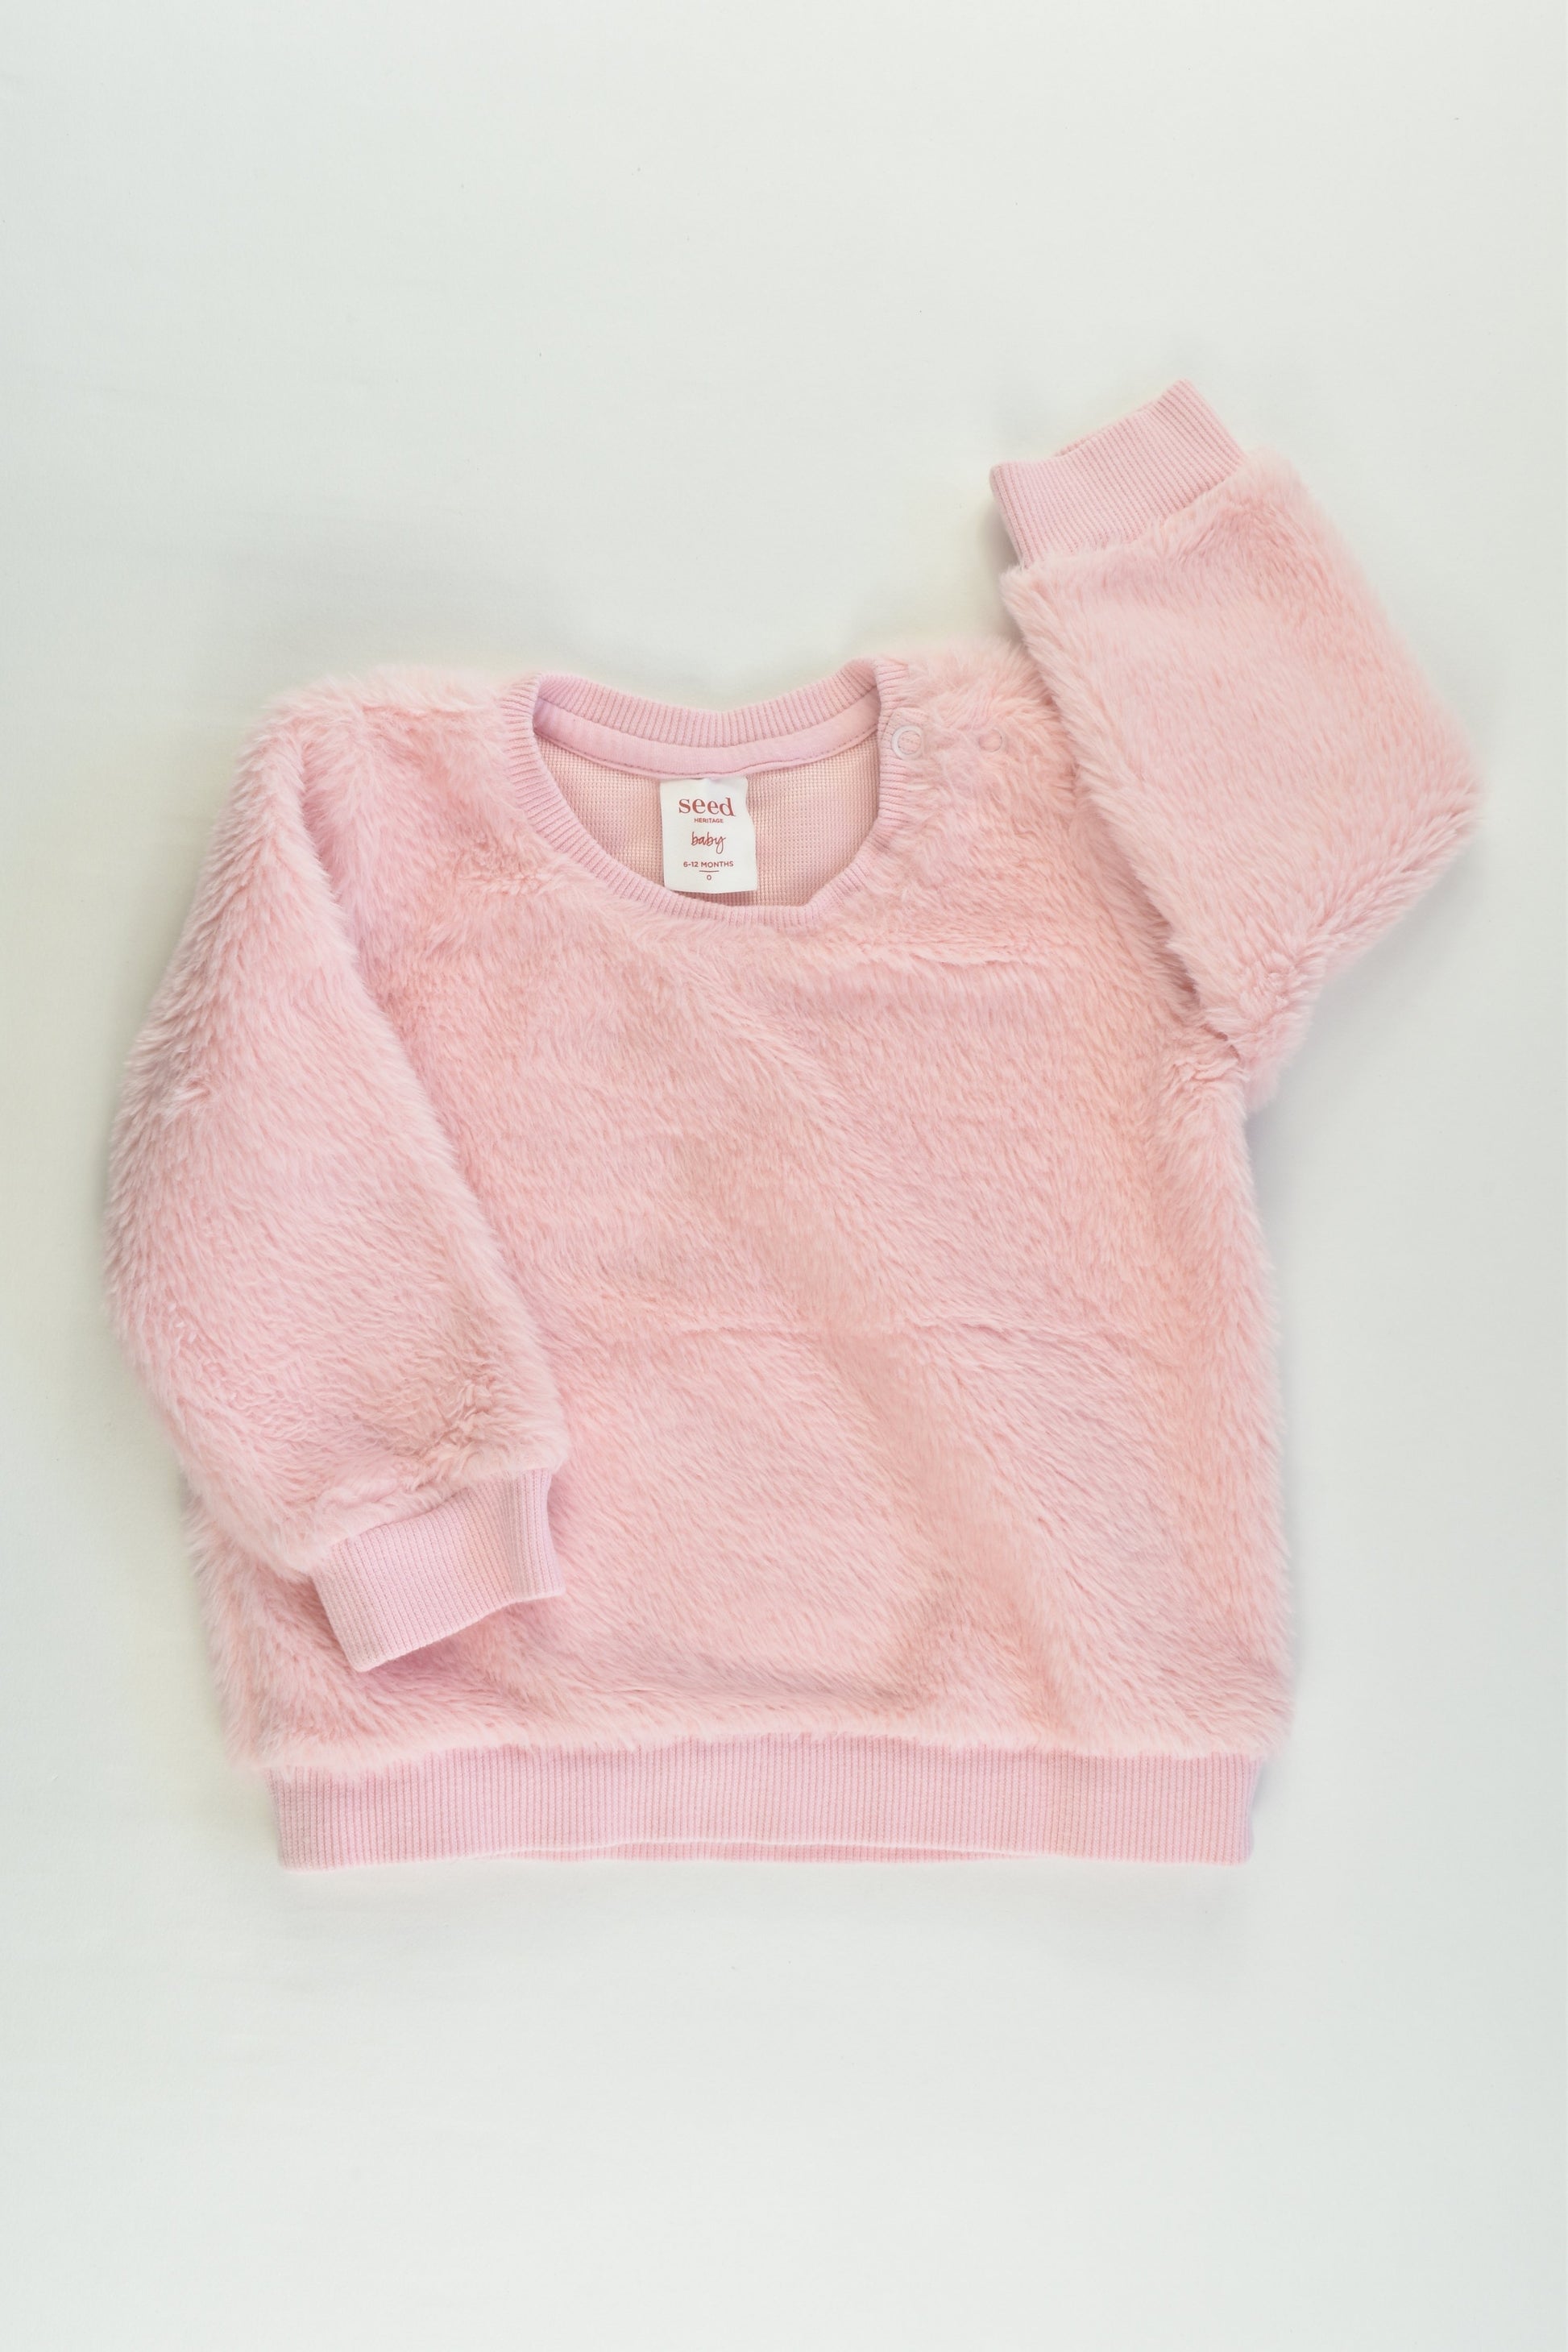 Seed Heritage Size 0 (6-12 months) Fluffy Jumper